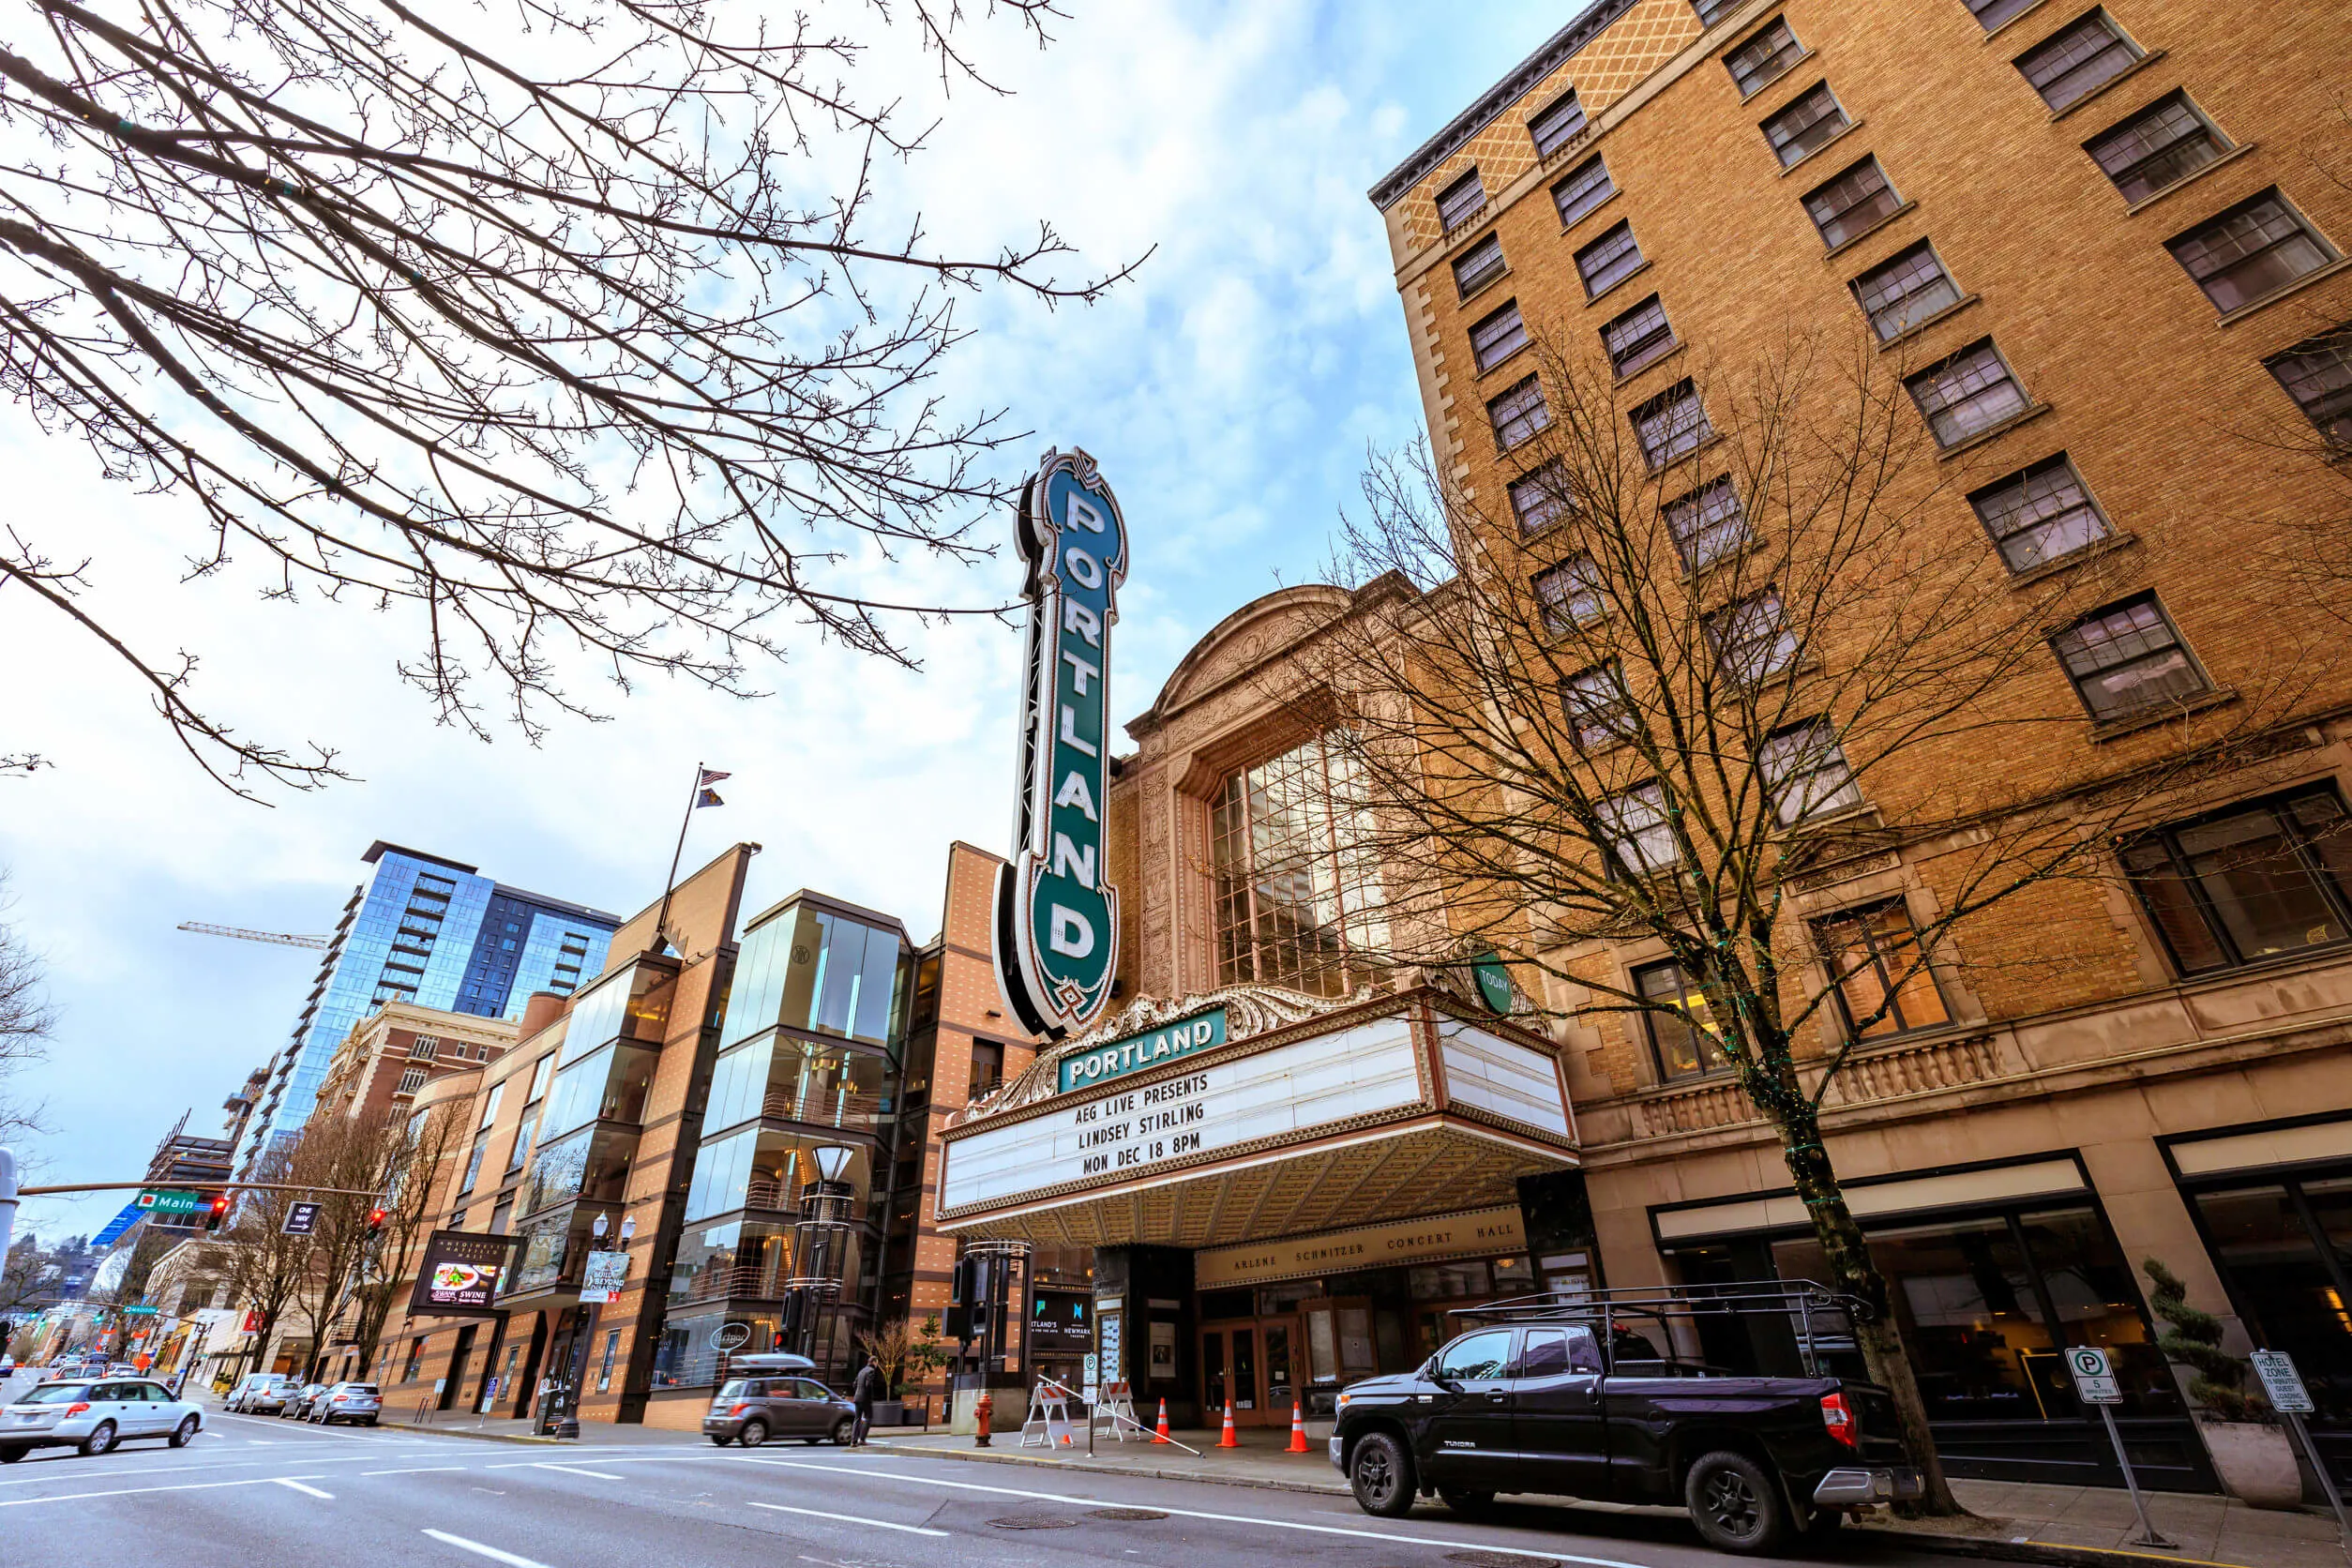 Portland, Oregon, United States - Dec 19, 2017: The iconic Portland sign of Arlene Schnitzer Concert Hall in downtown at winter season